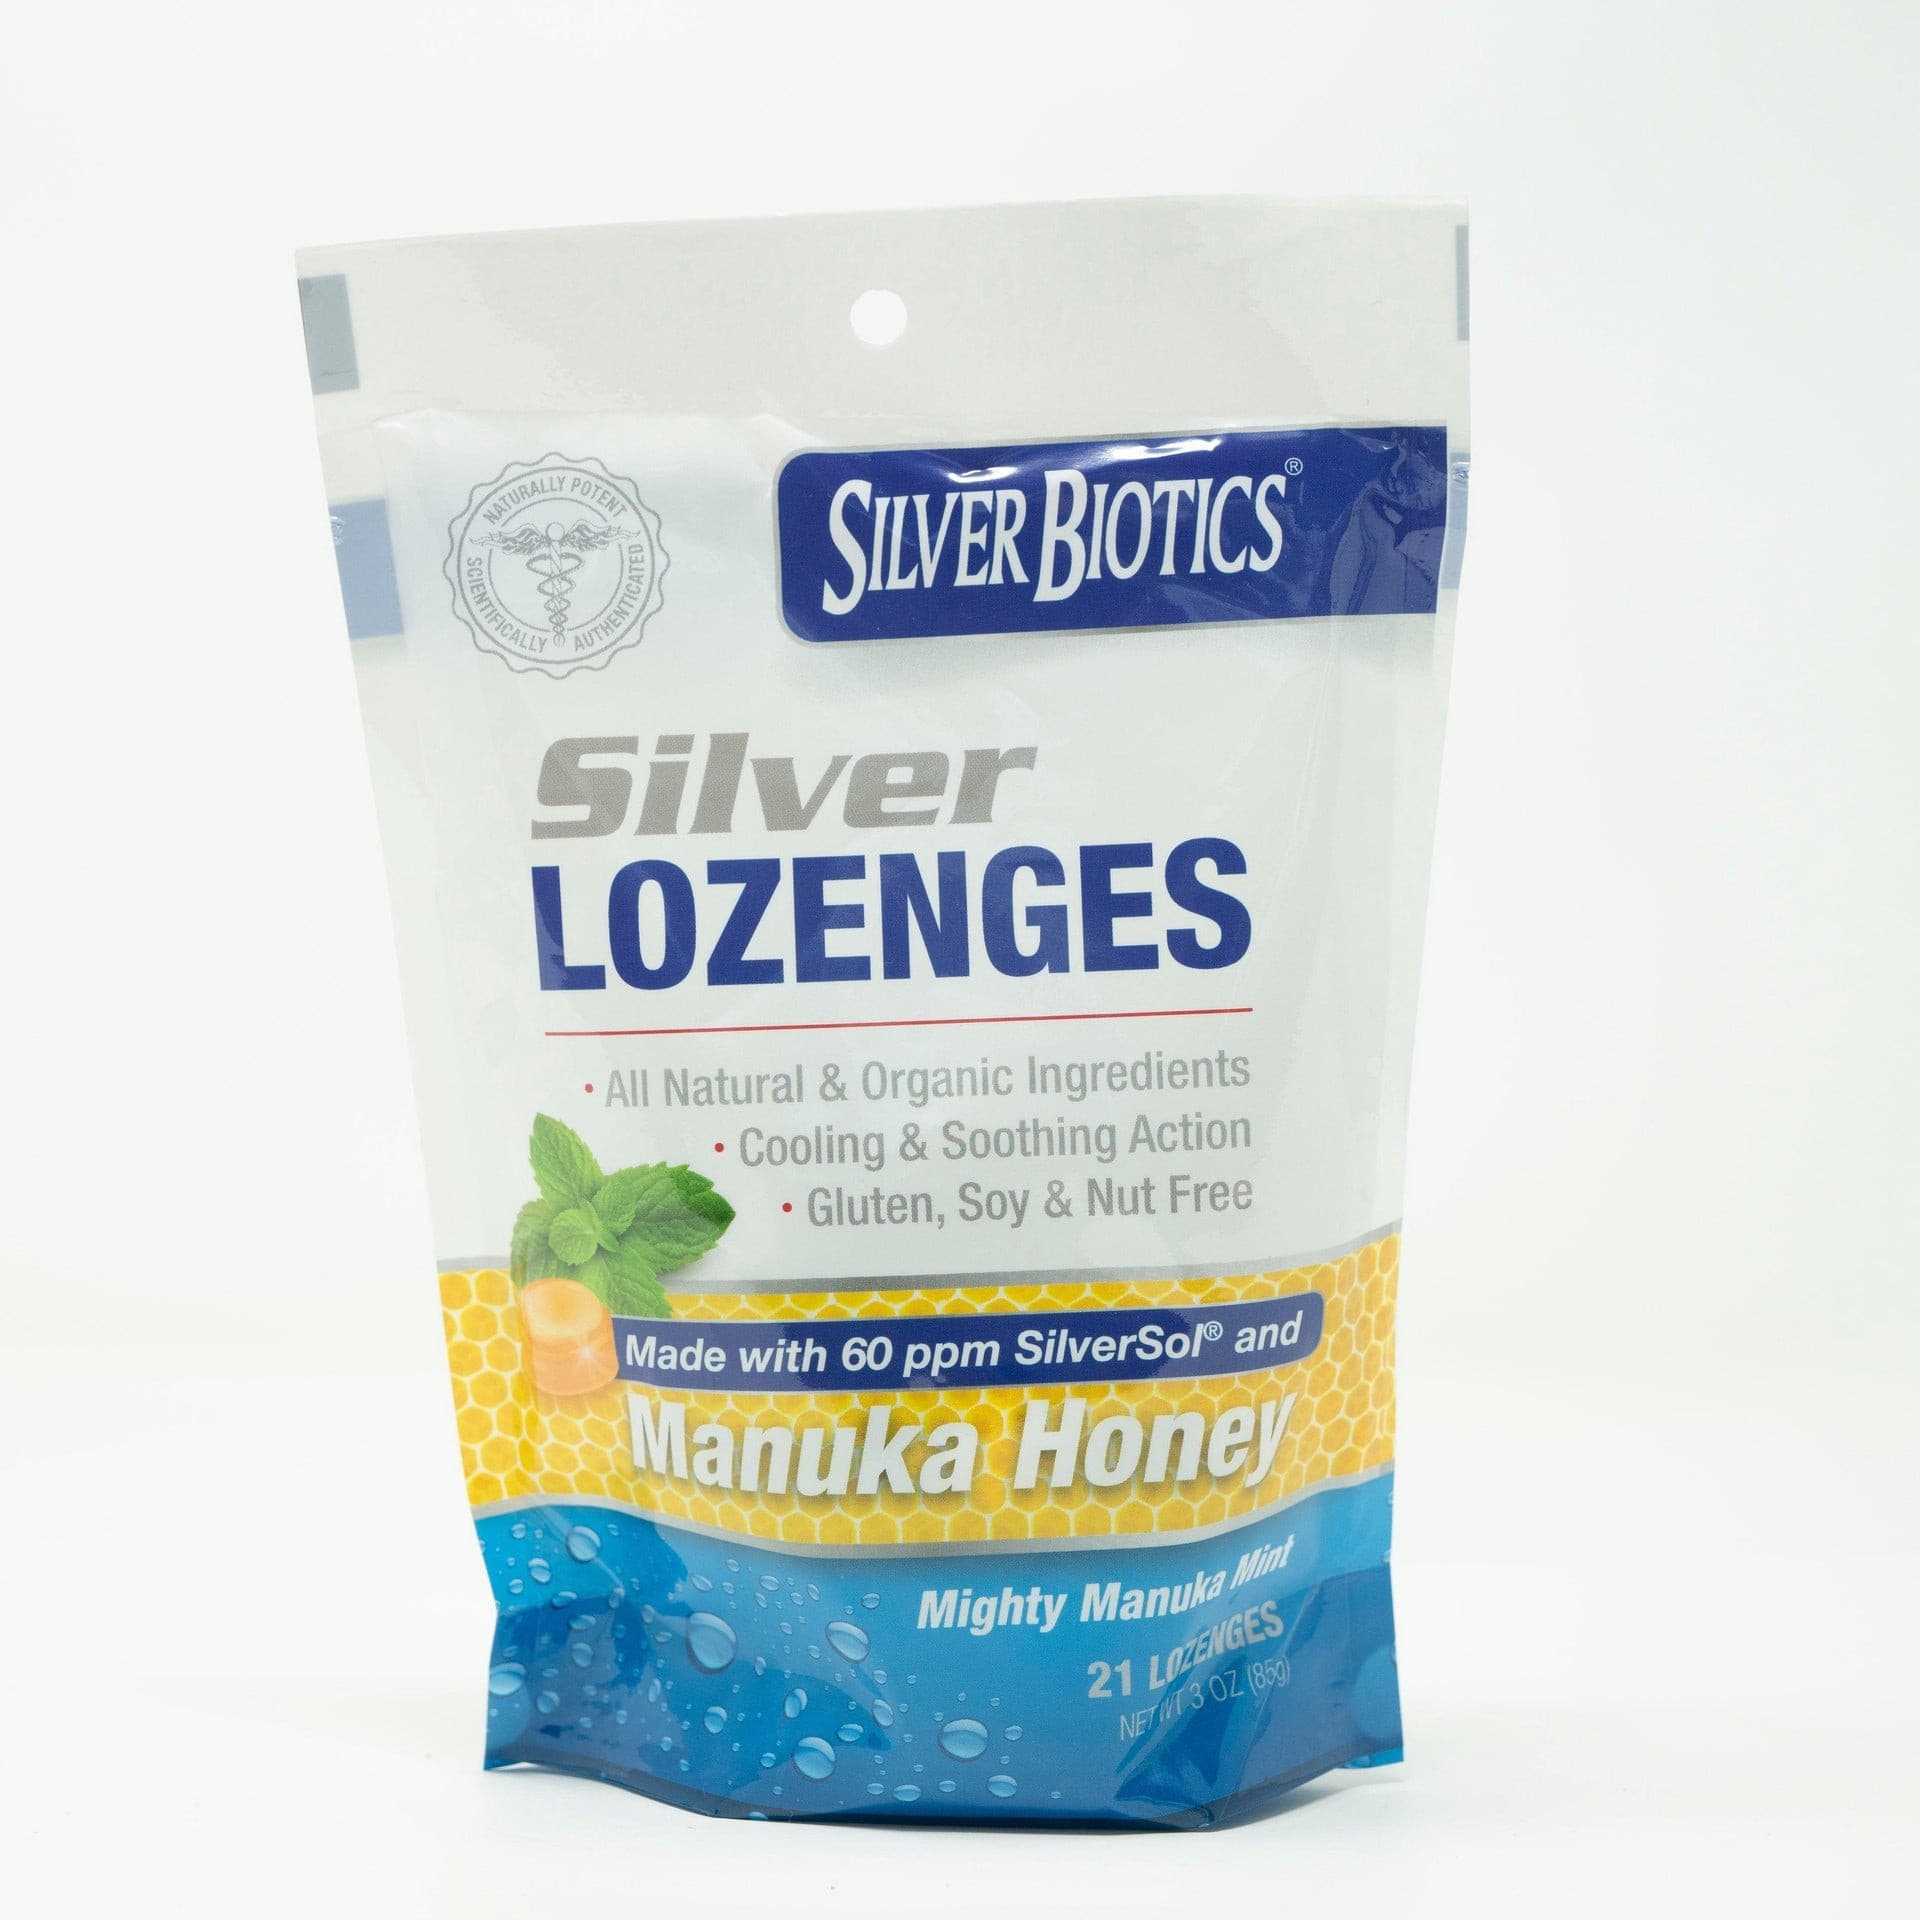 Silver Lozenges 21 Pack.